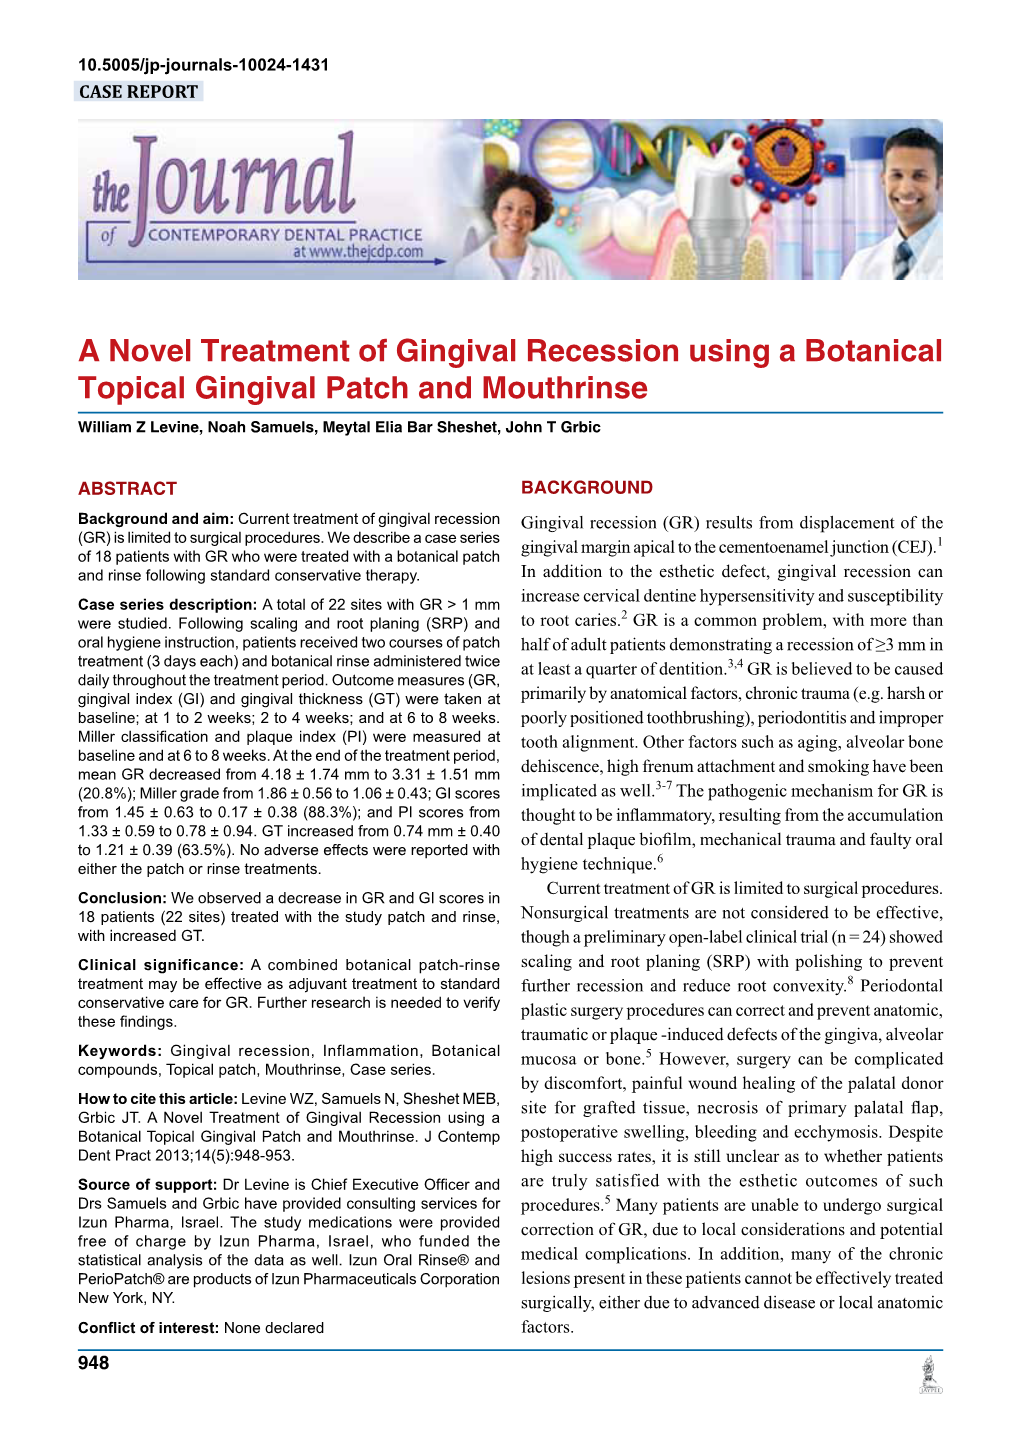 A Novel Treatment of Gingival Recession Using a Botanical Topical Gingival Patch and Mouthrinse William Z Levine, Noah Samuels, Meytal Elia Bar Sheshet, John T Grbic